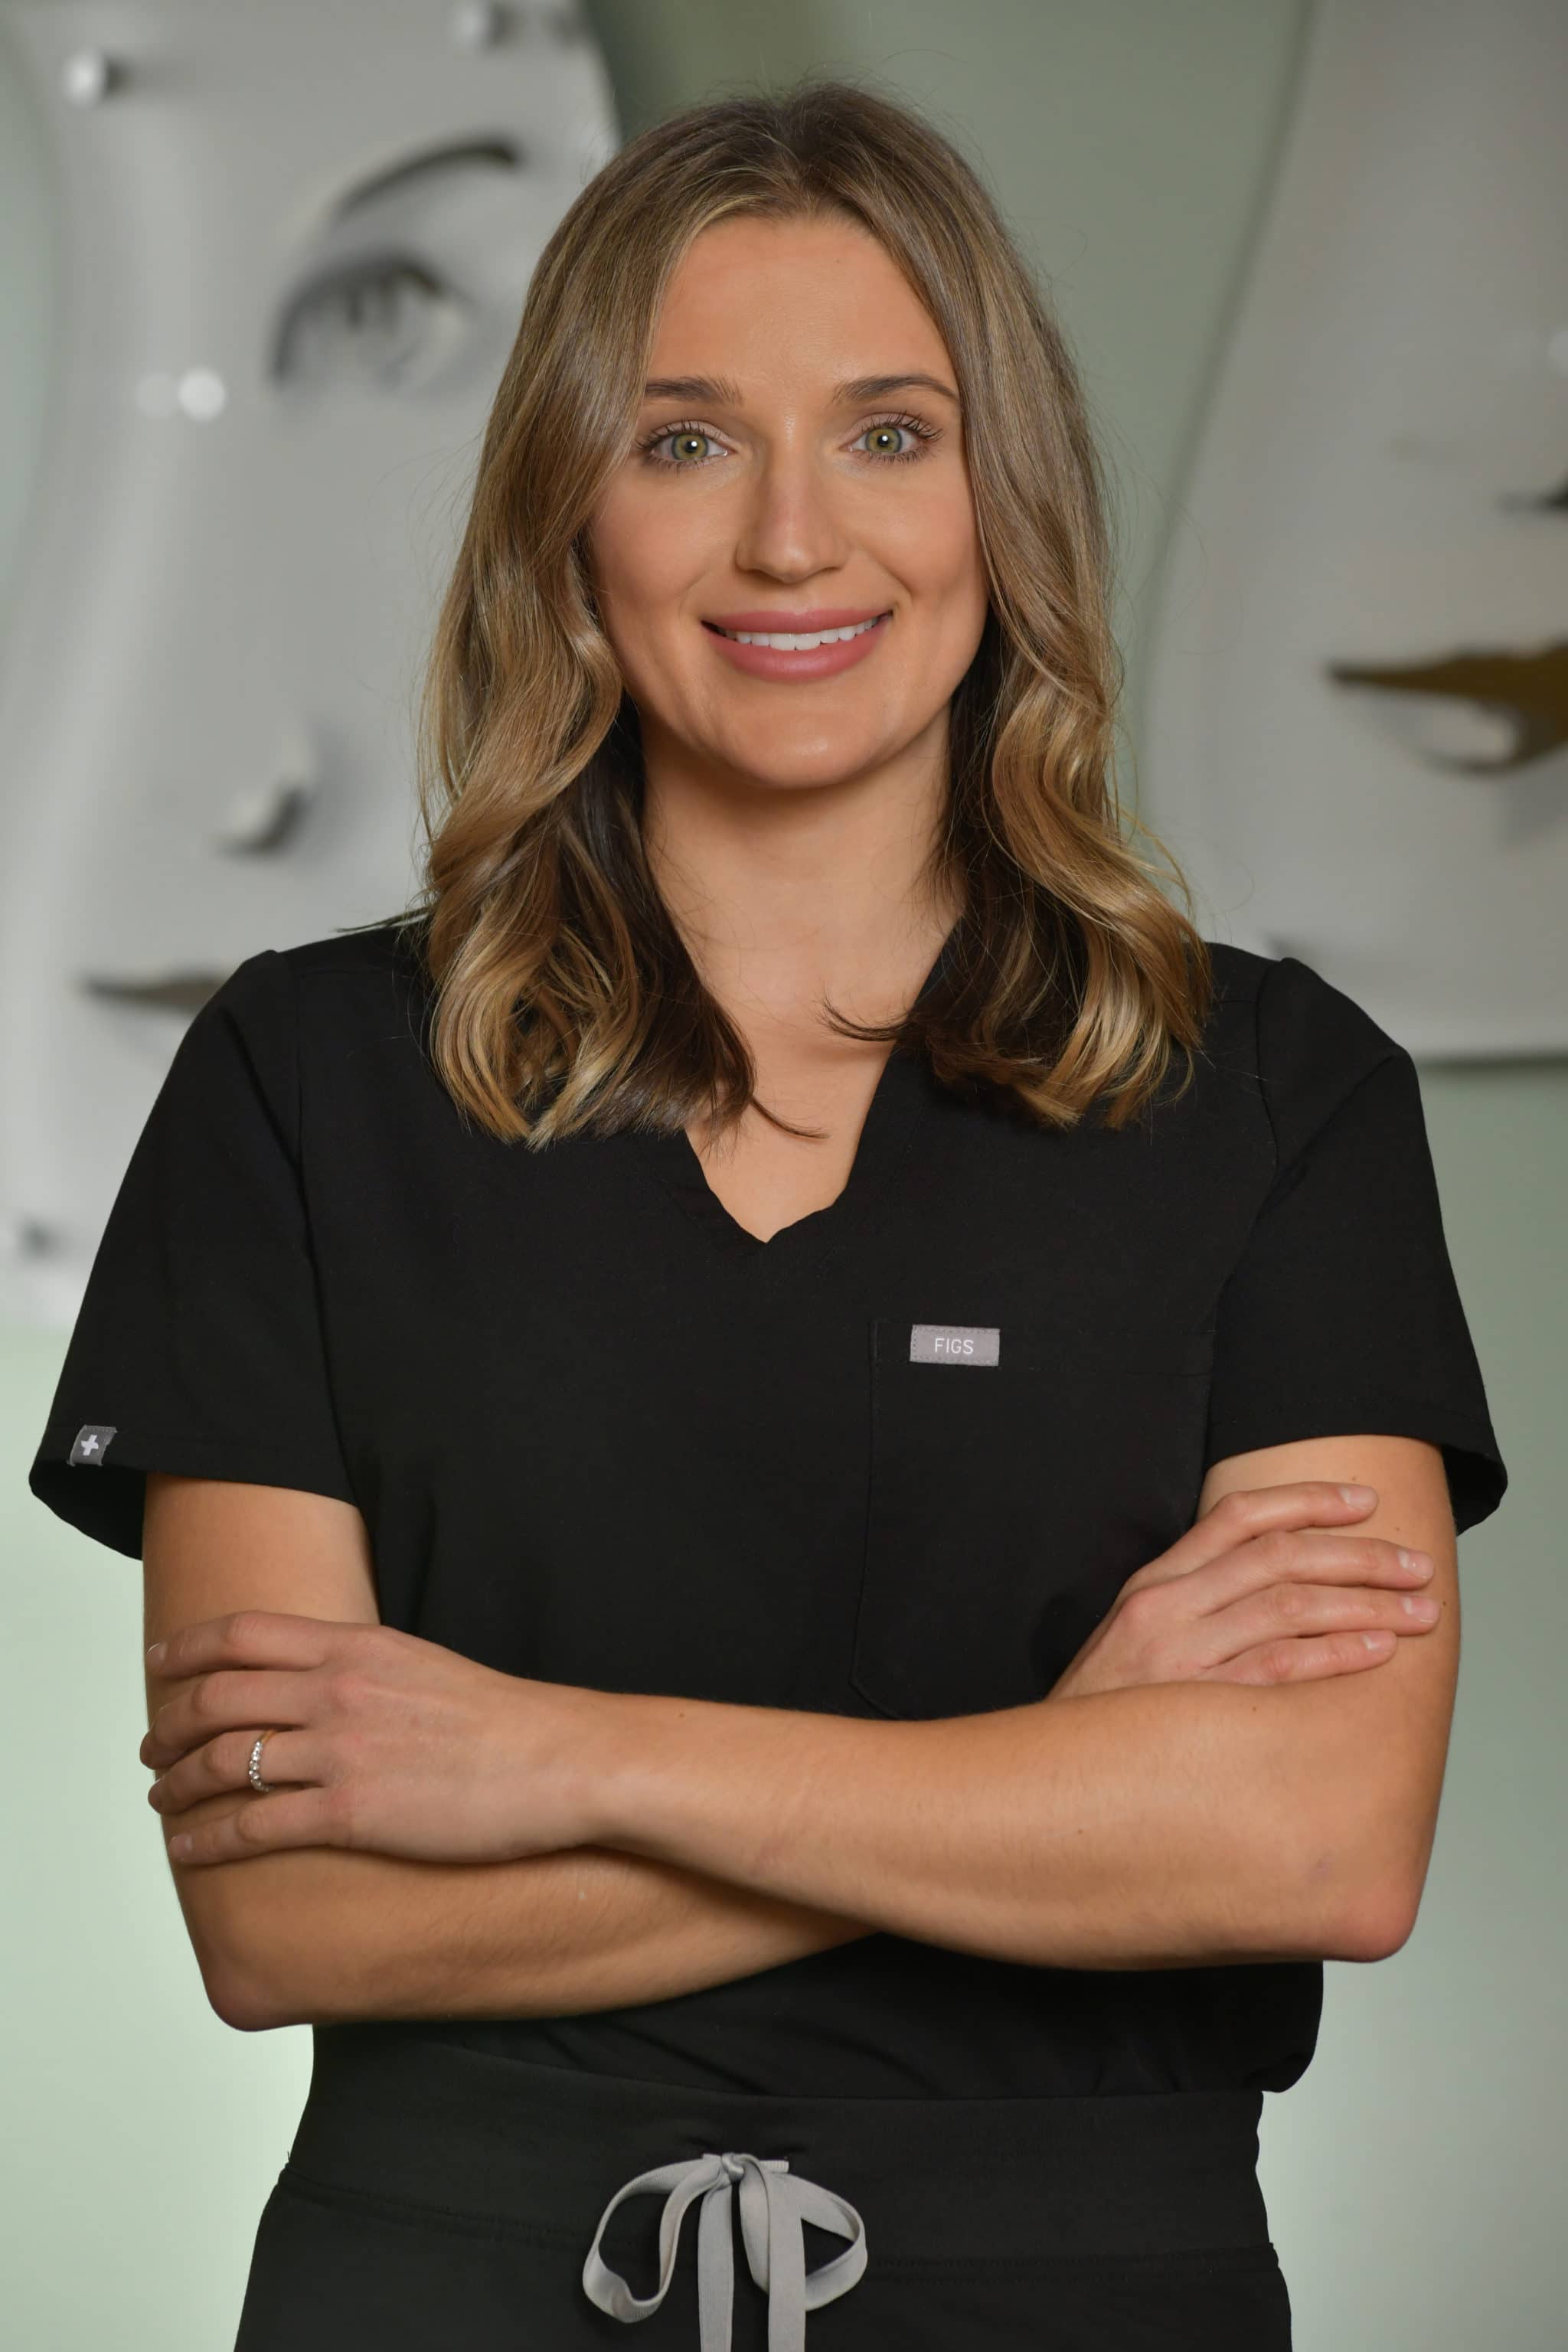 Headshot of female doctor smiling and folding arms in a relaxed manner